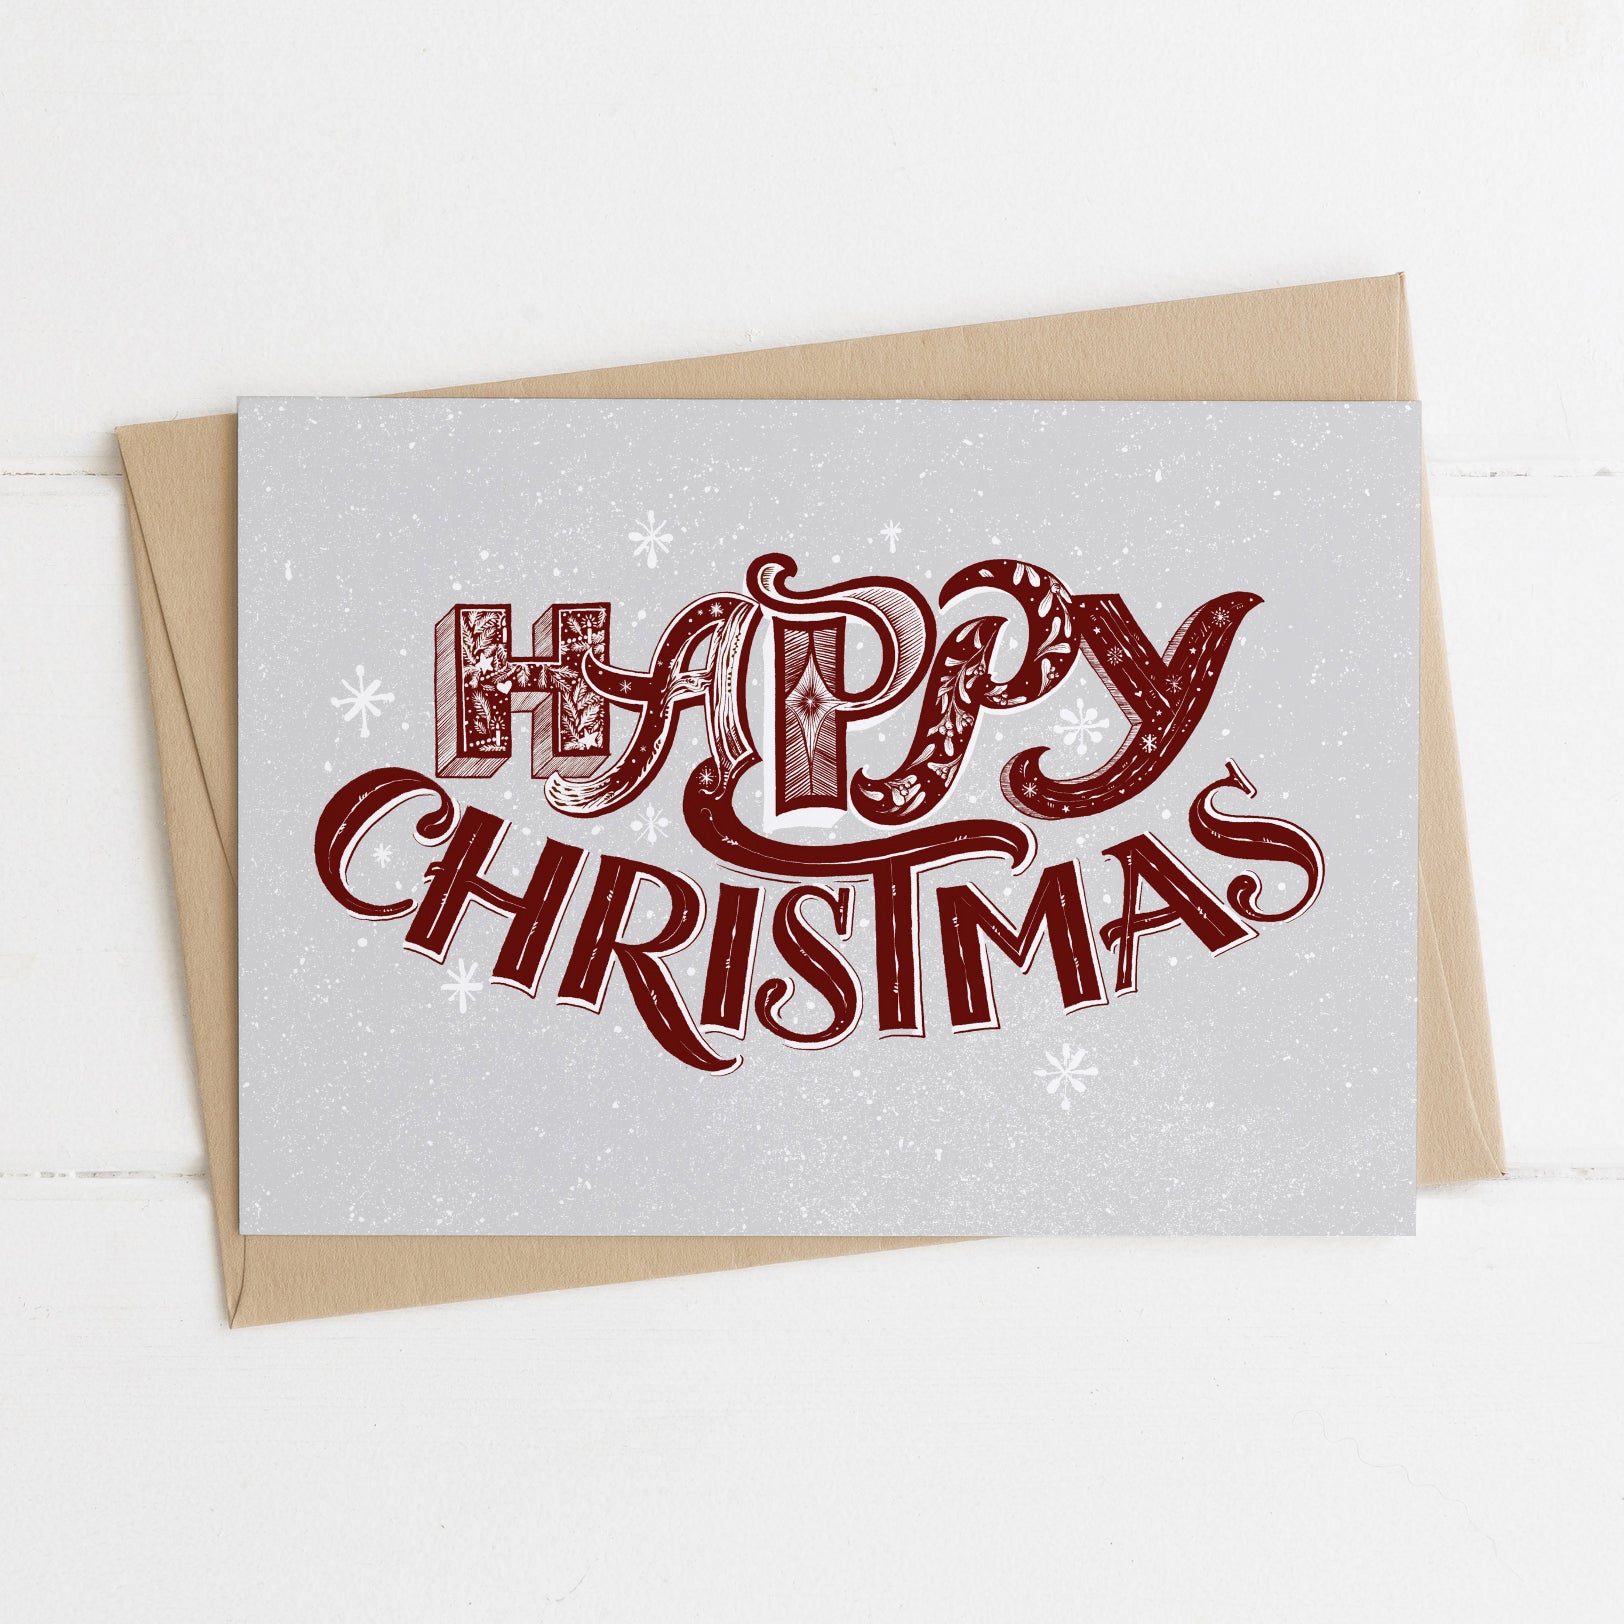 5 Christmas Cards - Gingerbread theme